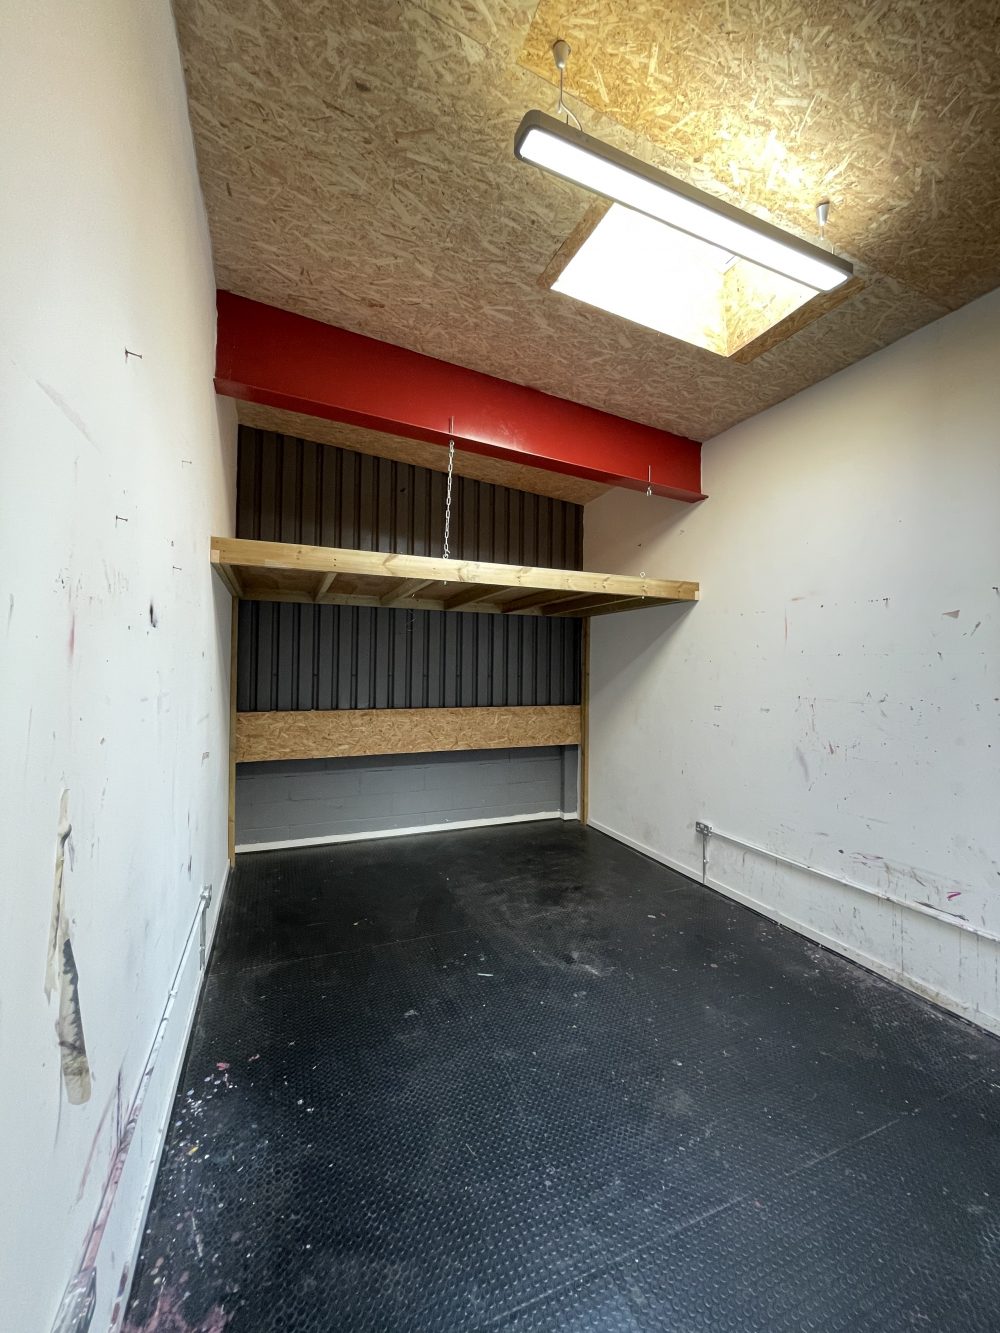 N4 Manor House Eade Road 1st Floor Unit To rent in Creative Warehouse Hub North London28